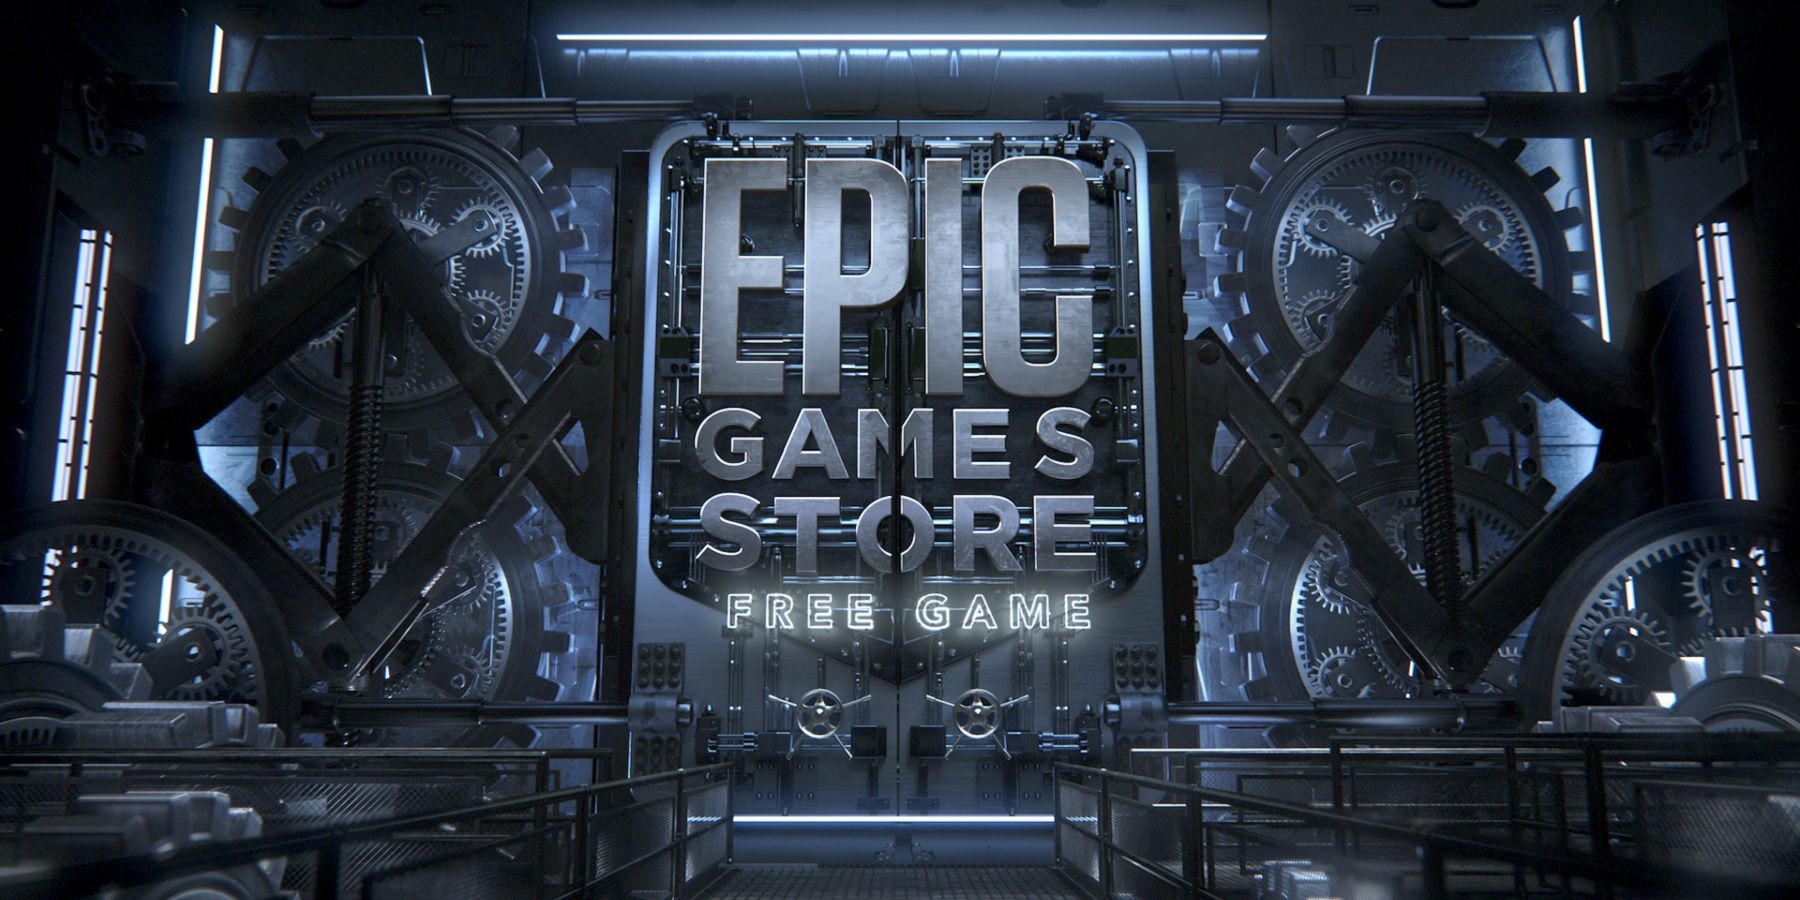 How To Get FREE Games On The Epic Games Store! (Mystery Vault 2022) 